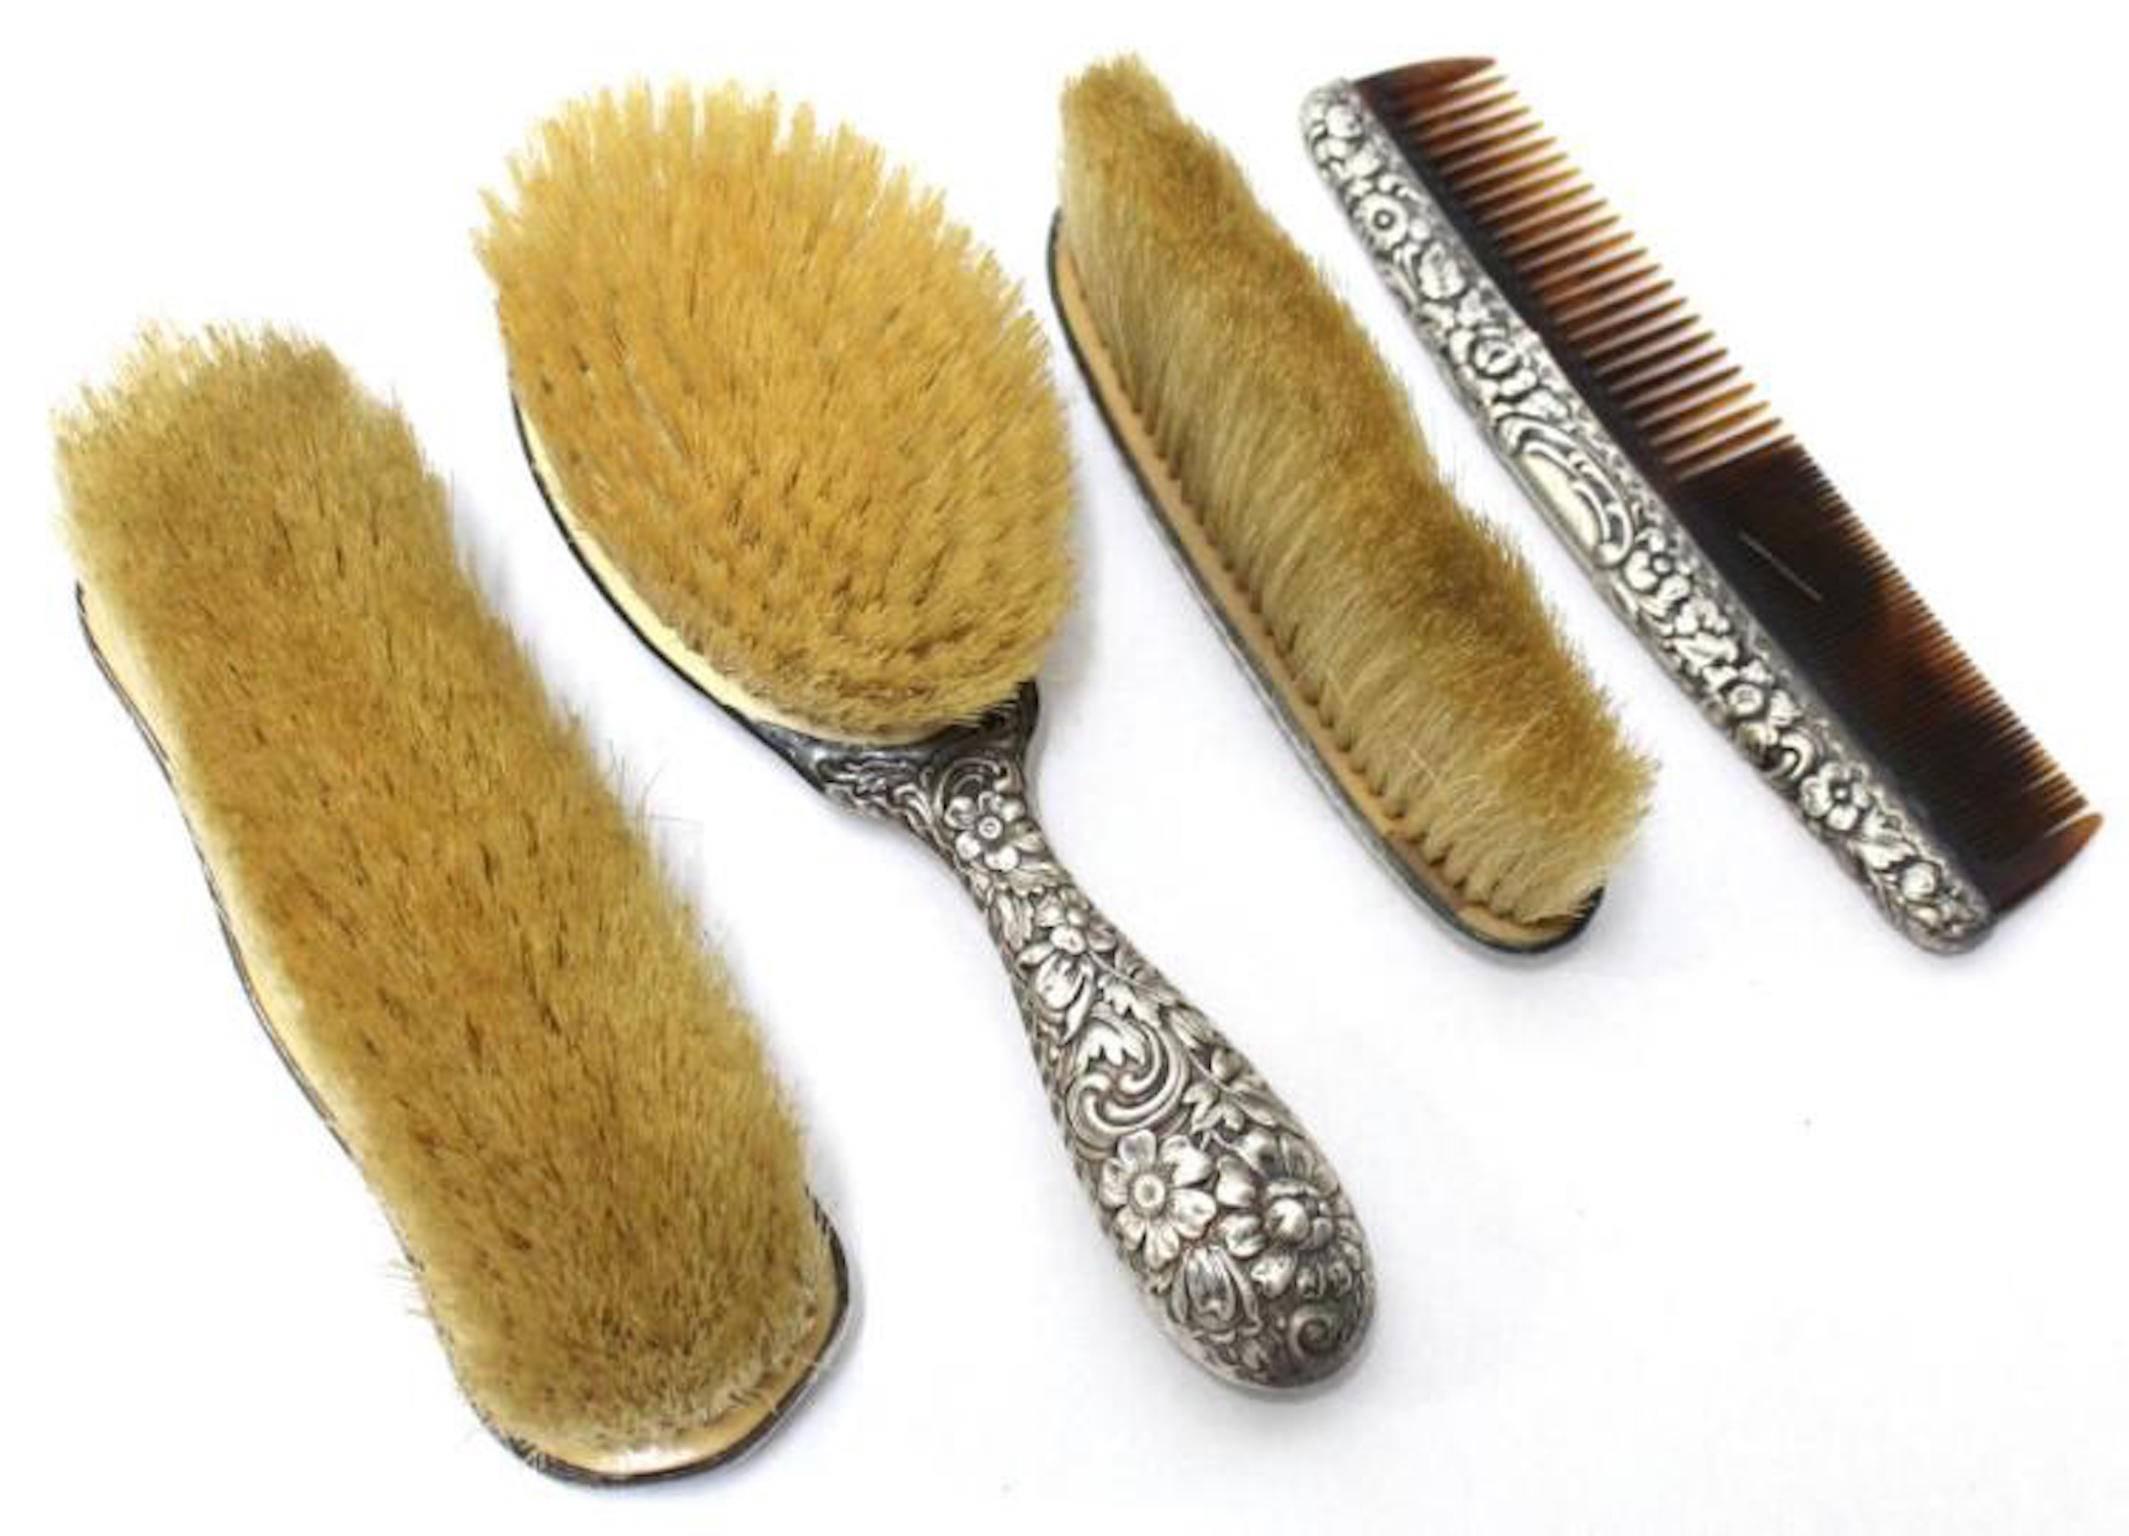 Assembled, comprising a hair brush, comb and clothes brush, each monogrammed "GBP," and a shoe brush monogrammed "JLG," each heavily covered in hammered roses, other flowers and C-scrolls, and with natural boar bristles. Longest: